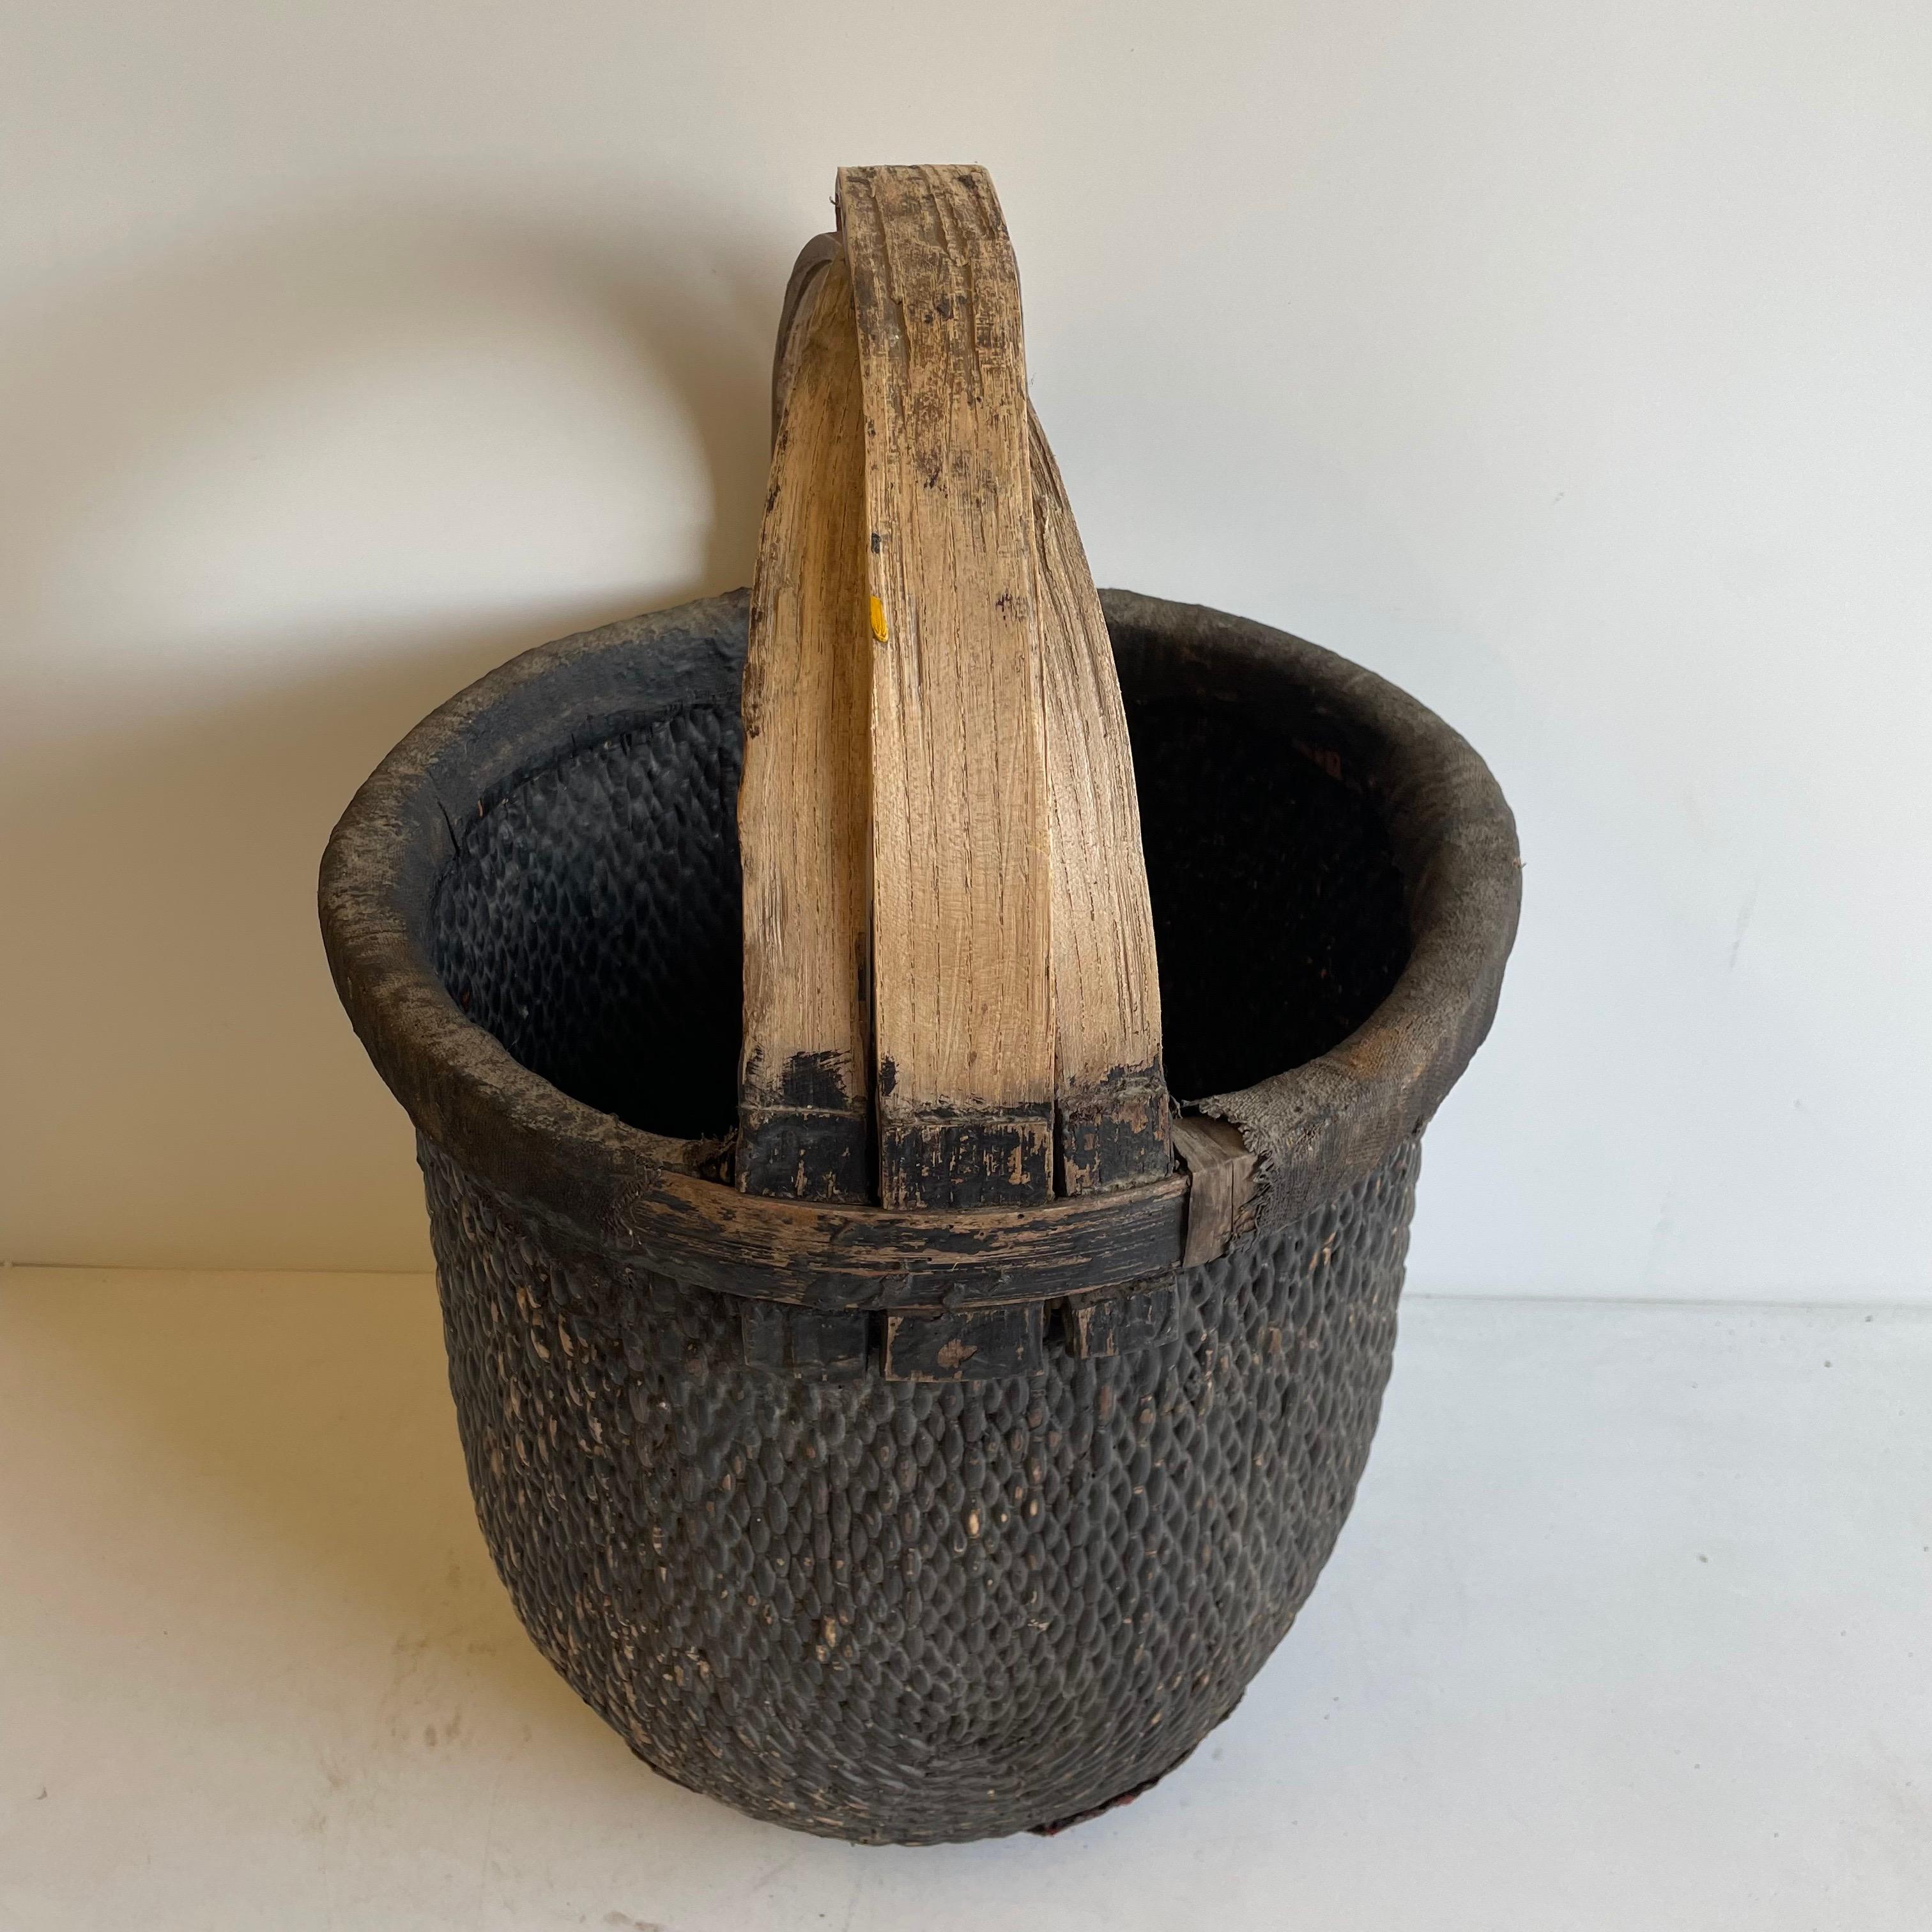 Vintage woven wicker basket with handle
Size: 15.5 x 15.5 x 24
Origin: Asia
c20th century.